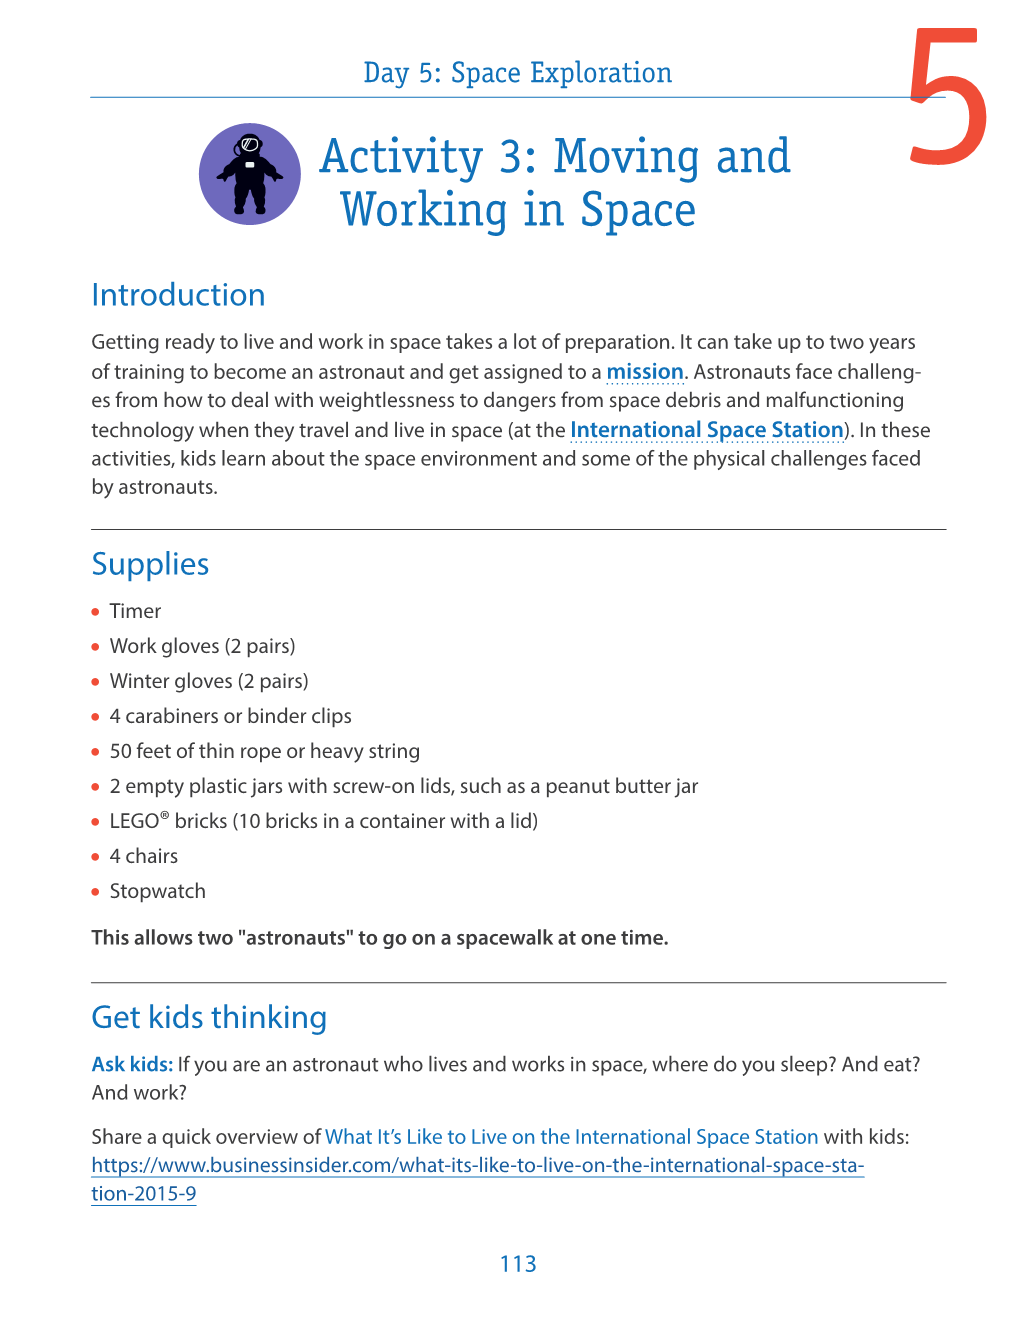 Moving and Working in Space"]